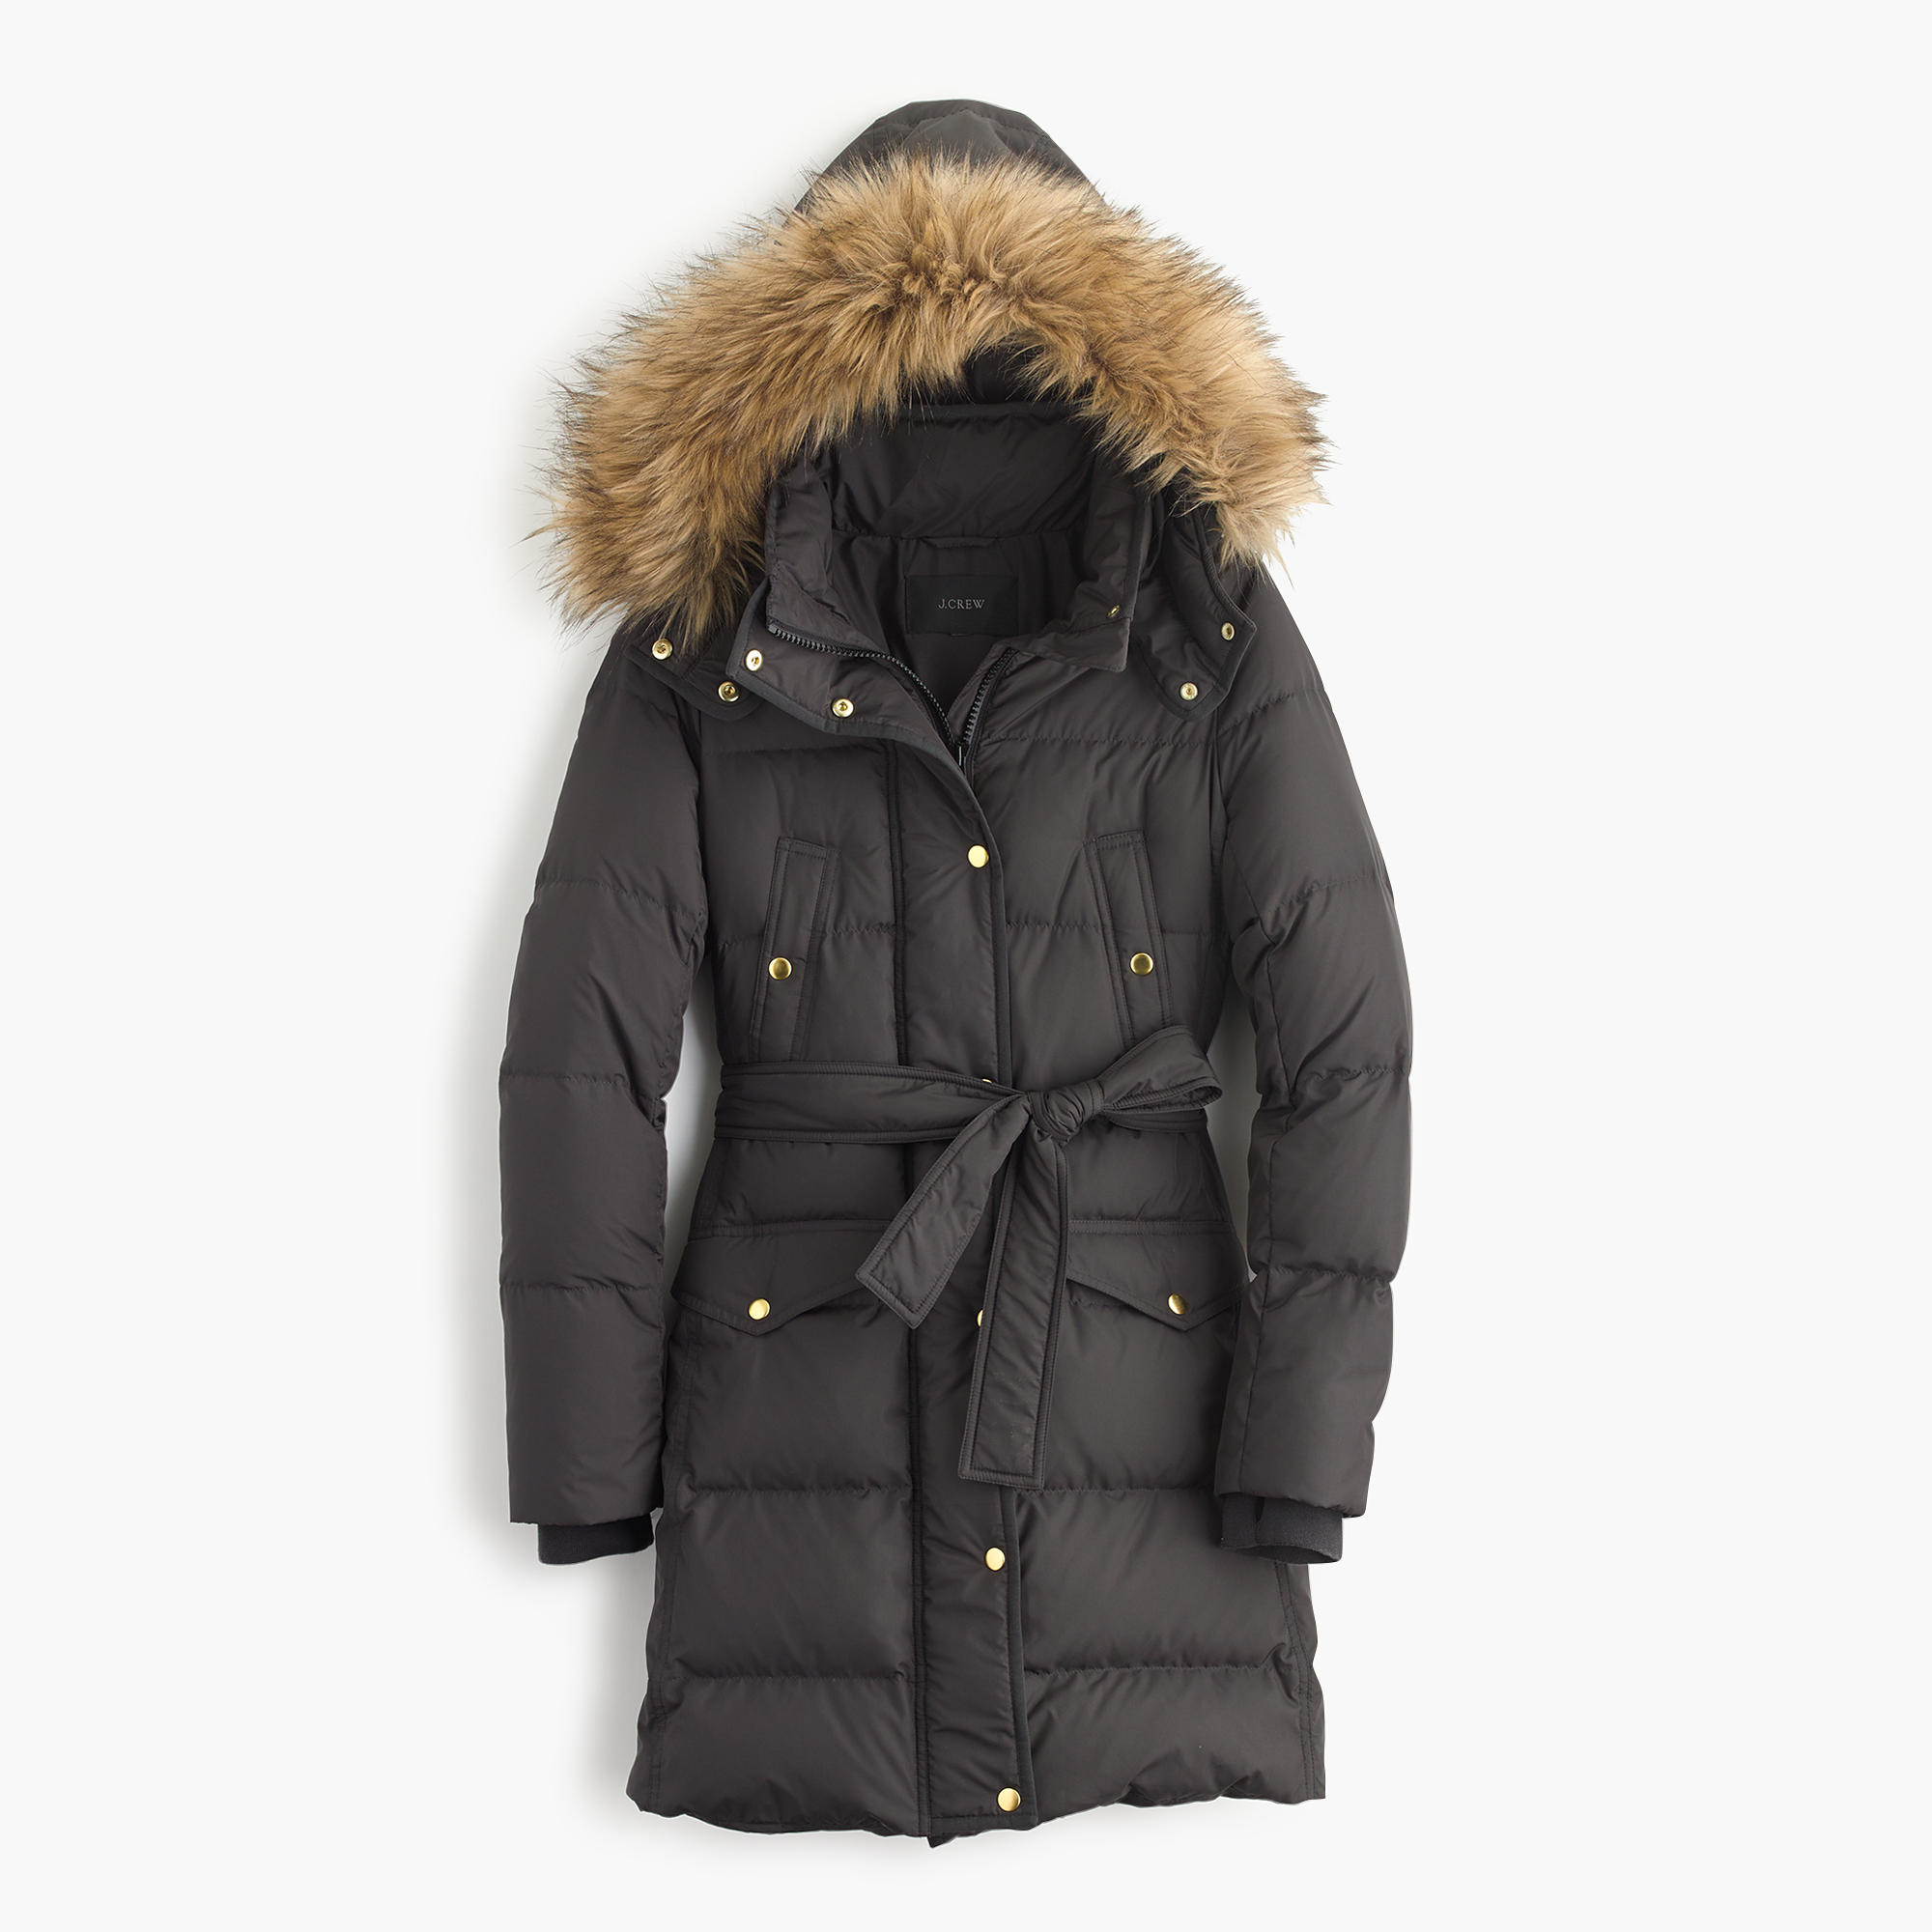 J.crew Wintress Puffer Coat With Faux-fur Hood in Gray (steely grey) | Lyst